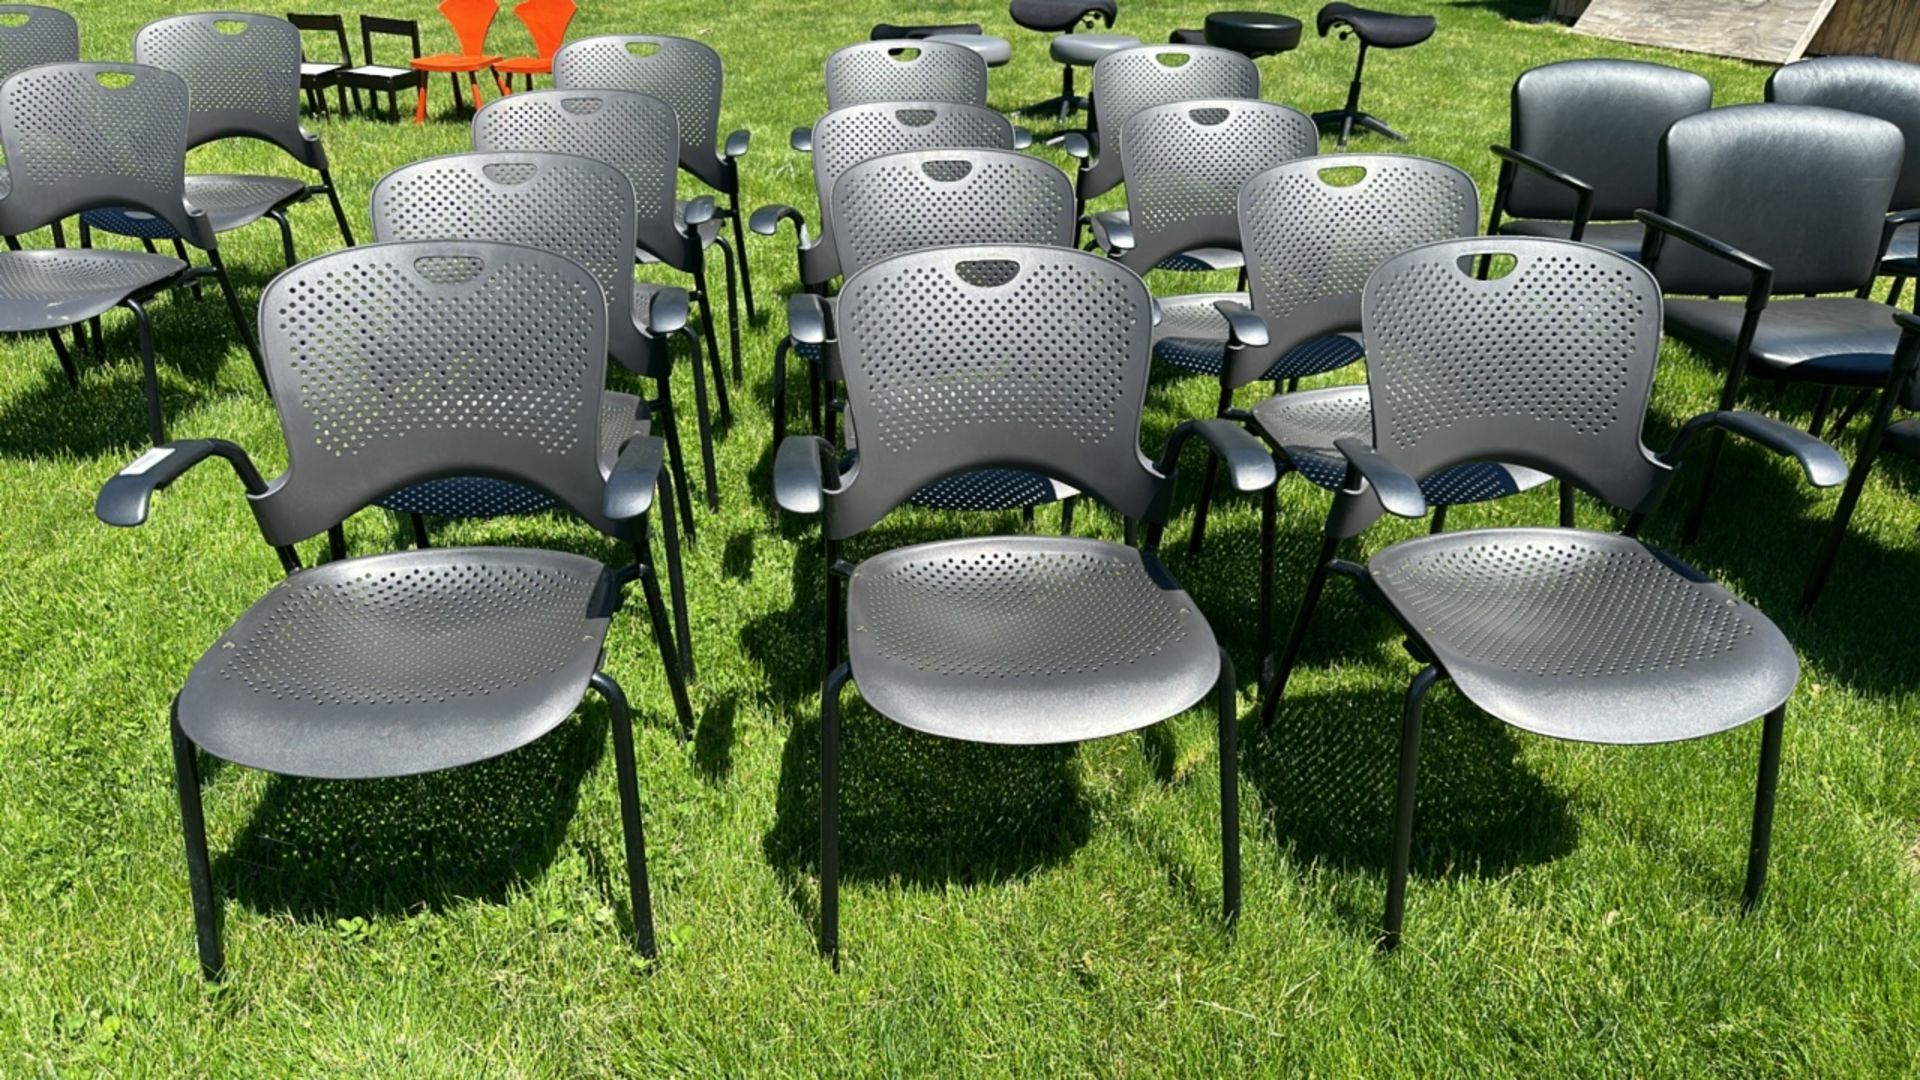 PLASTIC SIDE CHAIRS WITH ARM RESTS- BLACK (QTY. 13)